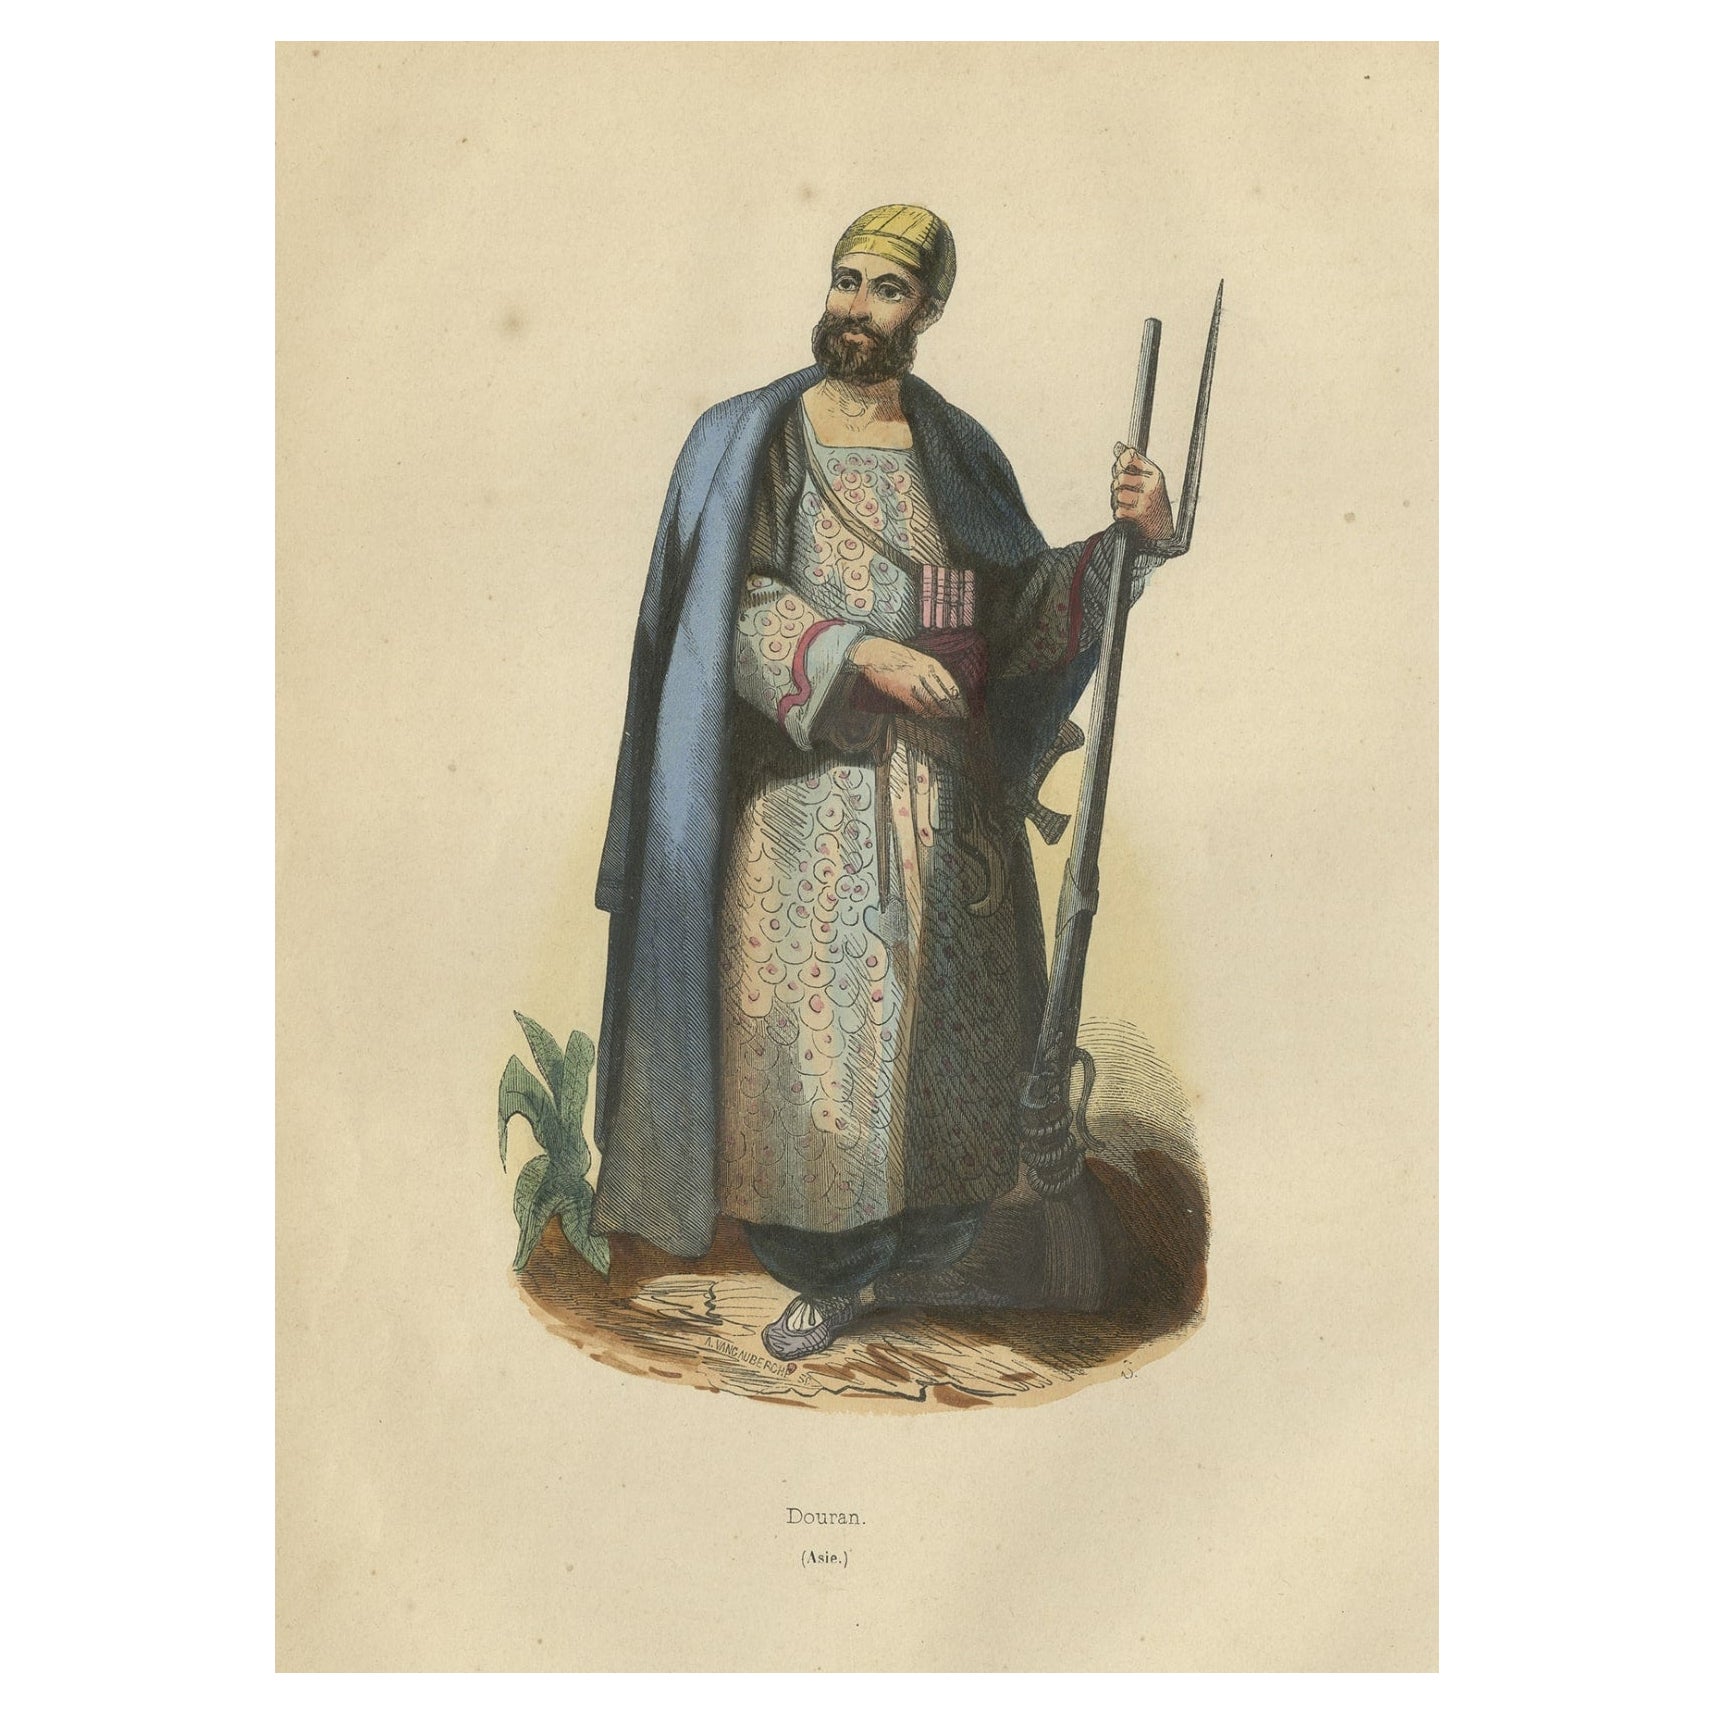 Antique Costume Print of an Arab 'Douran' with Weapons in Asia, 1843